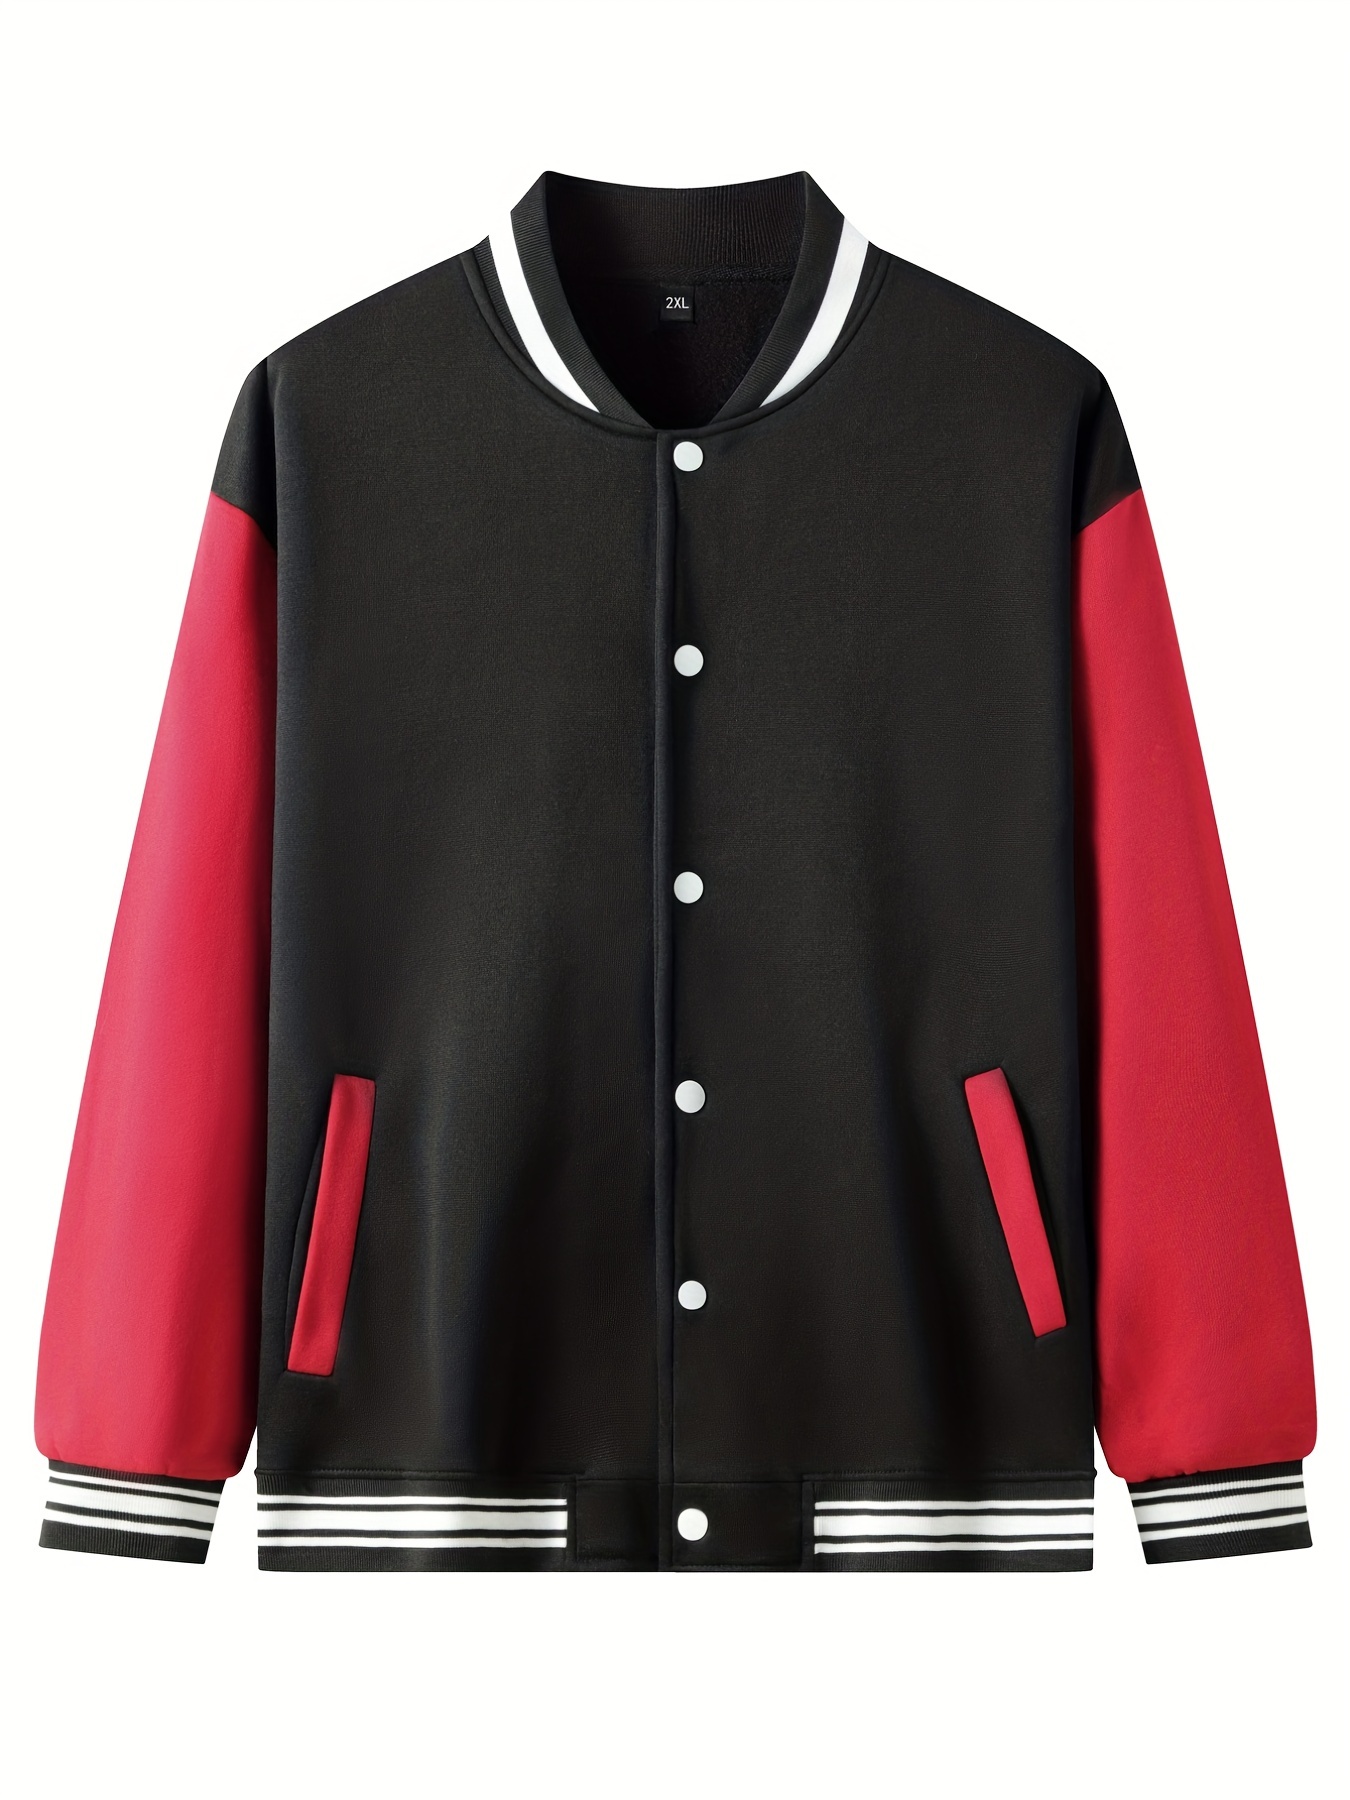 classic design varsity jacket mens casual color block button up jacket for spring fall school baseball details 6